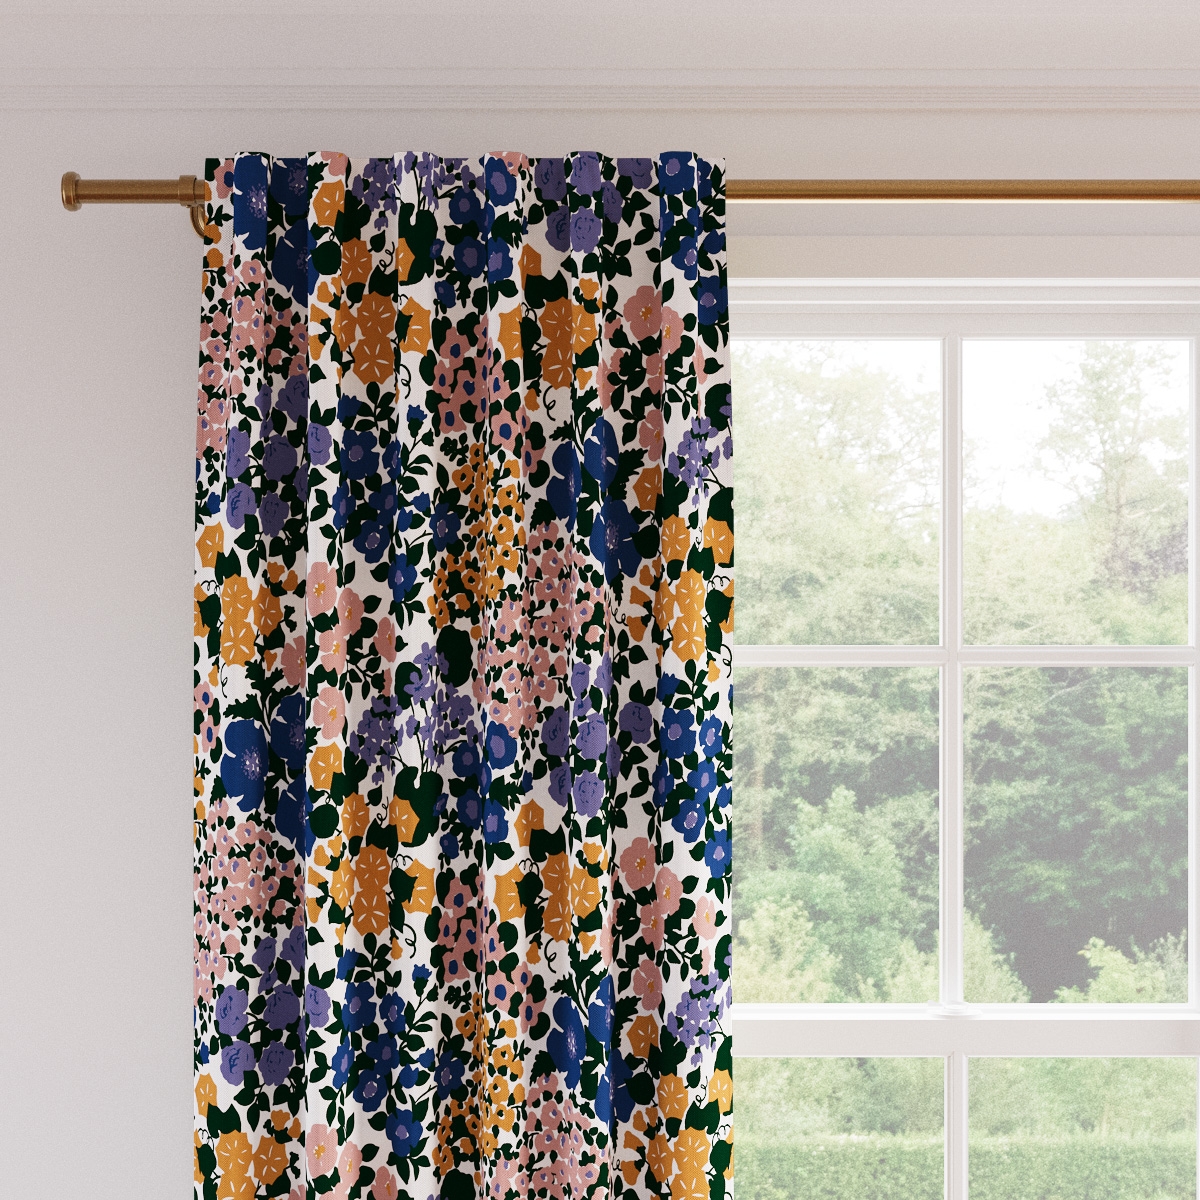 Printed Linen Curtain, Lavender Million Flowers, 50" x 96", Privacy - Image 1